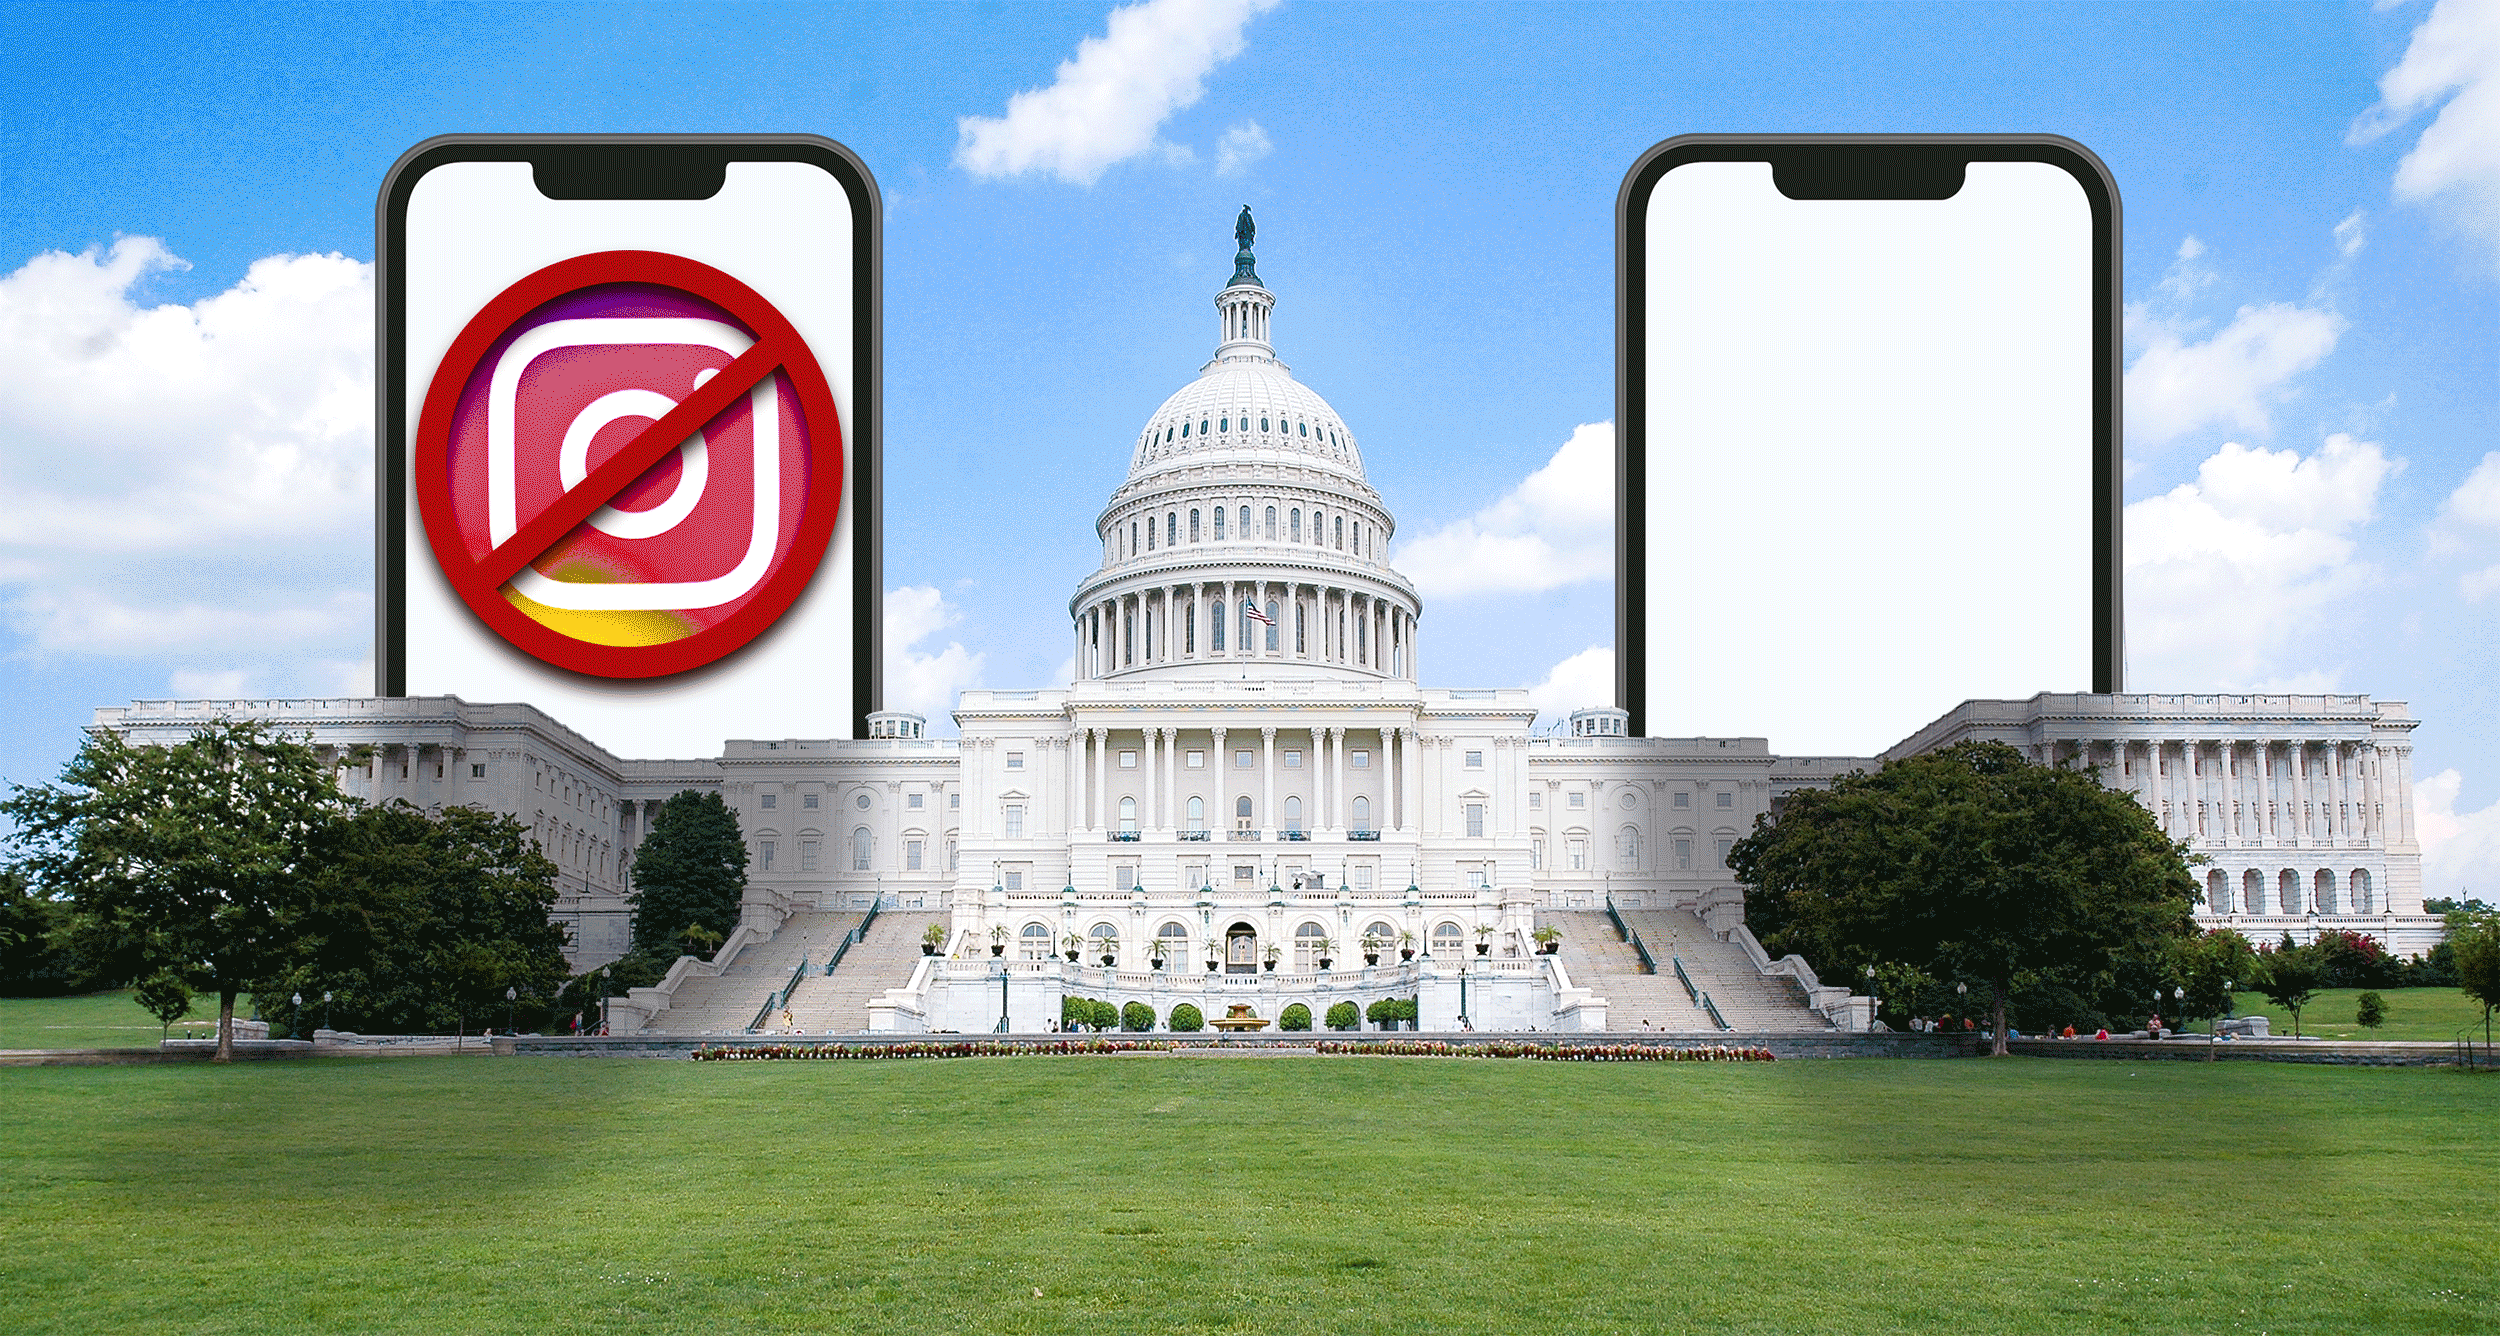 The U.S. Capitol building with a smartphone on either side showing social media logos being crossed out.